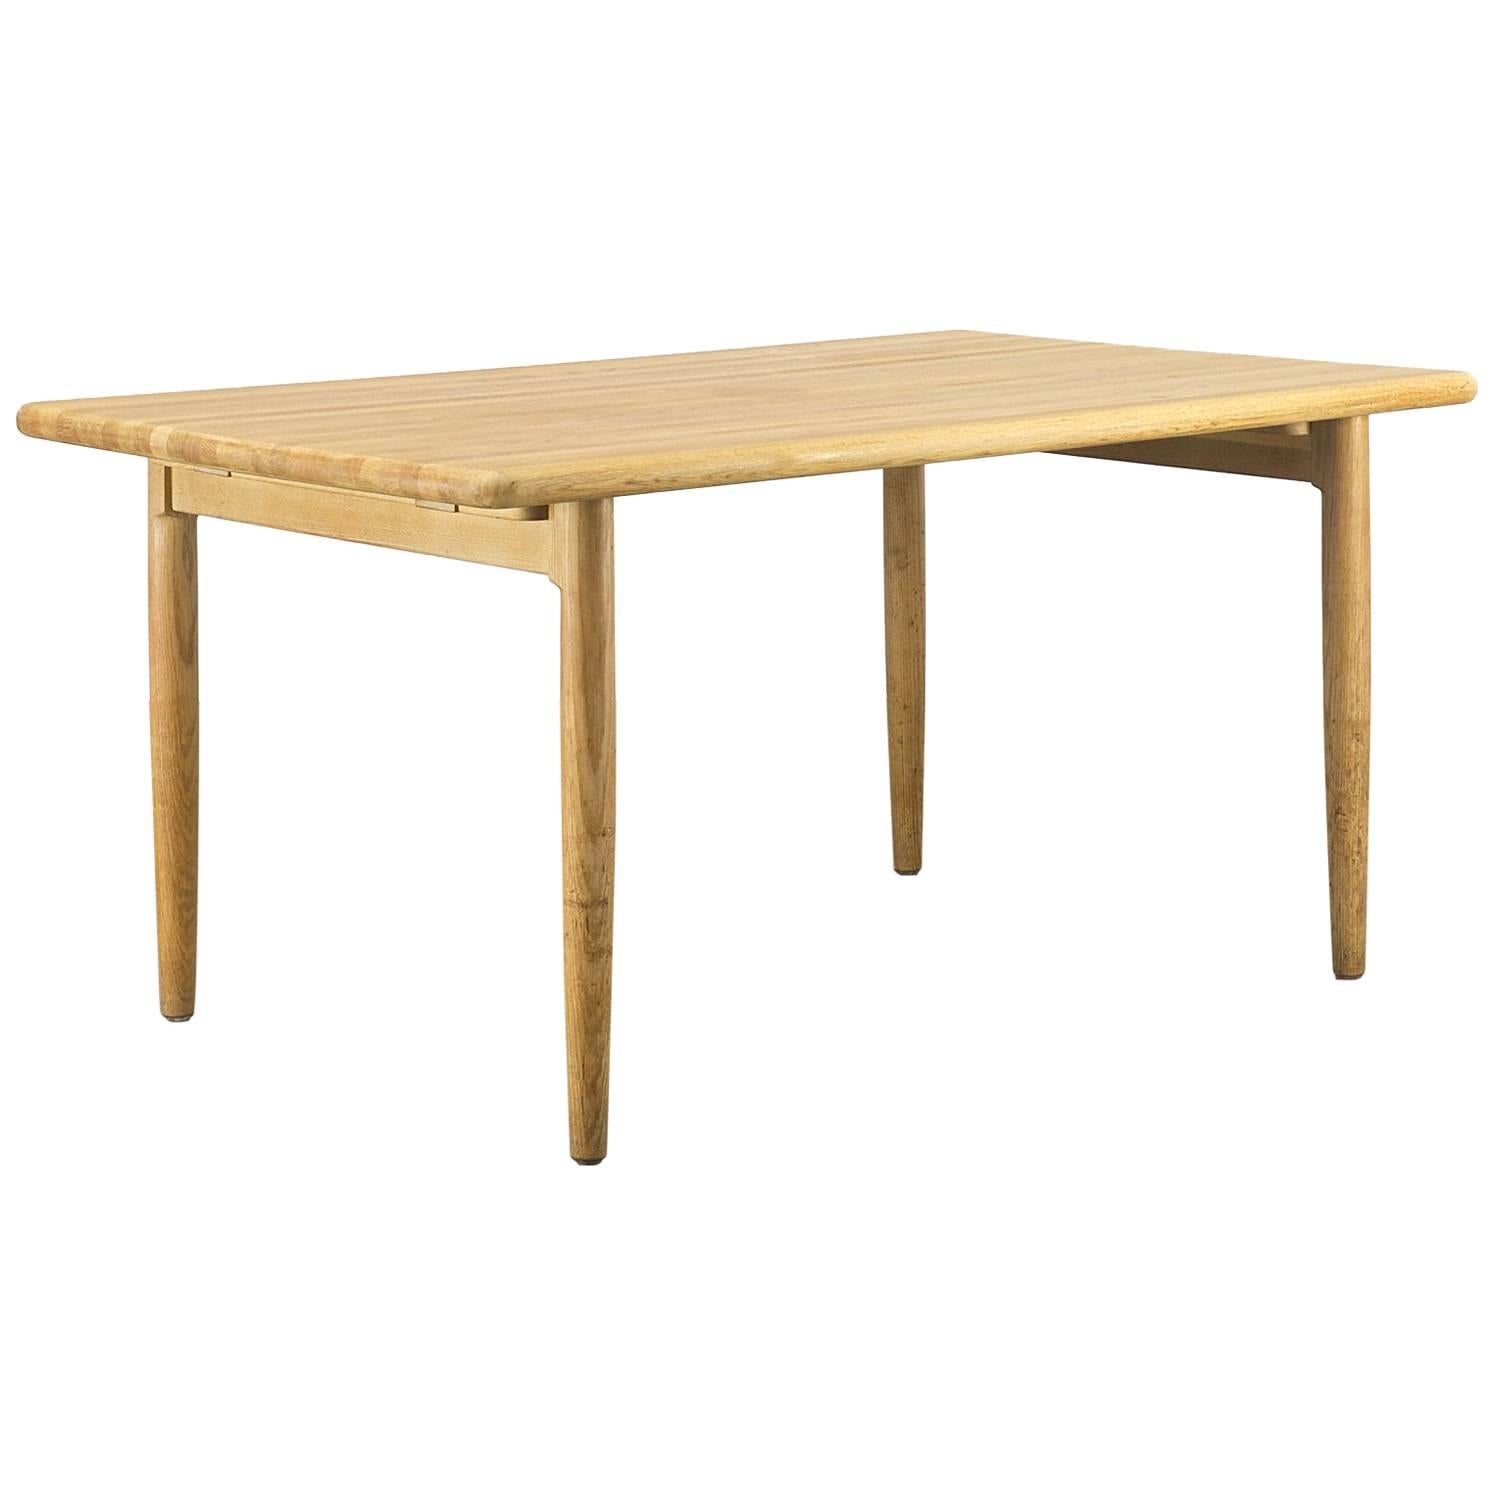 1960s Moller Massiv Smoked Oak Dining Table For Sale